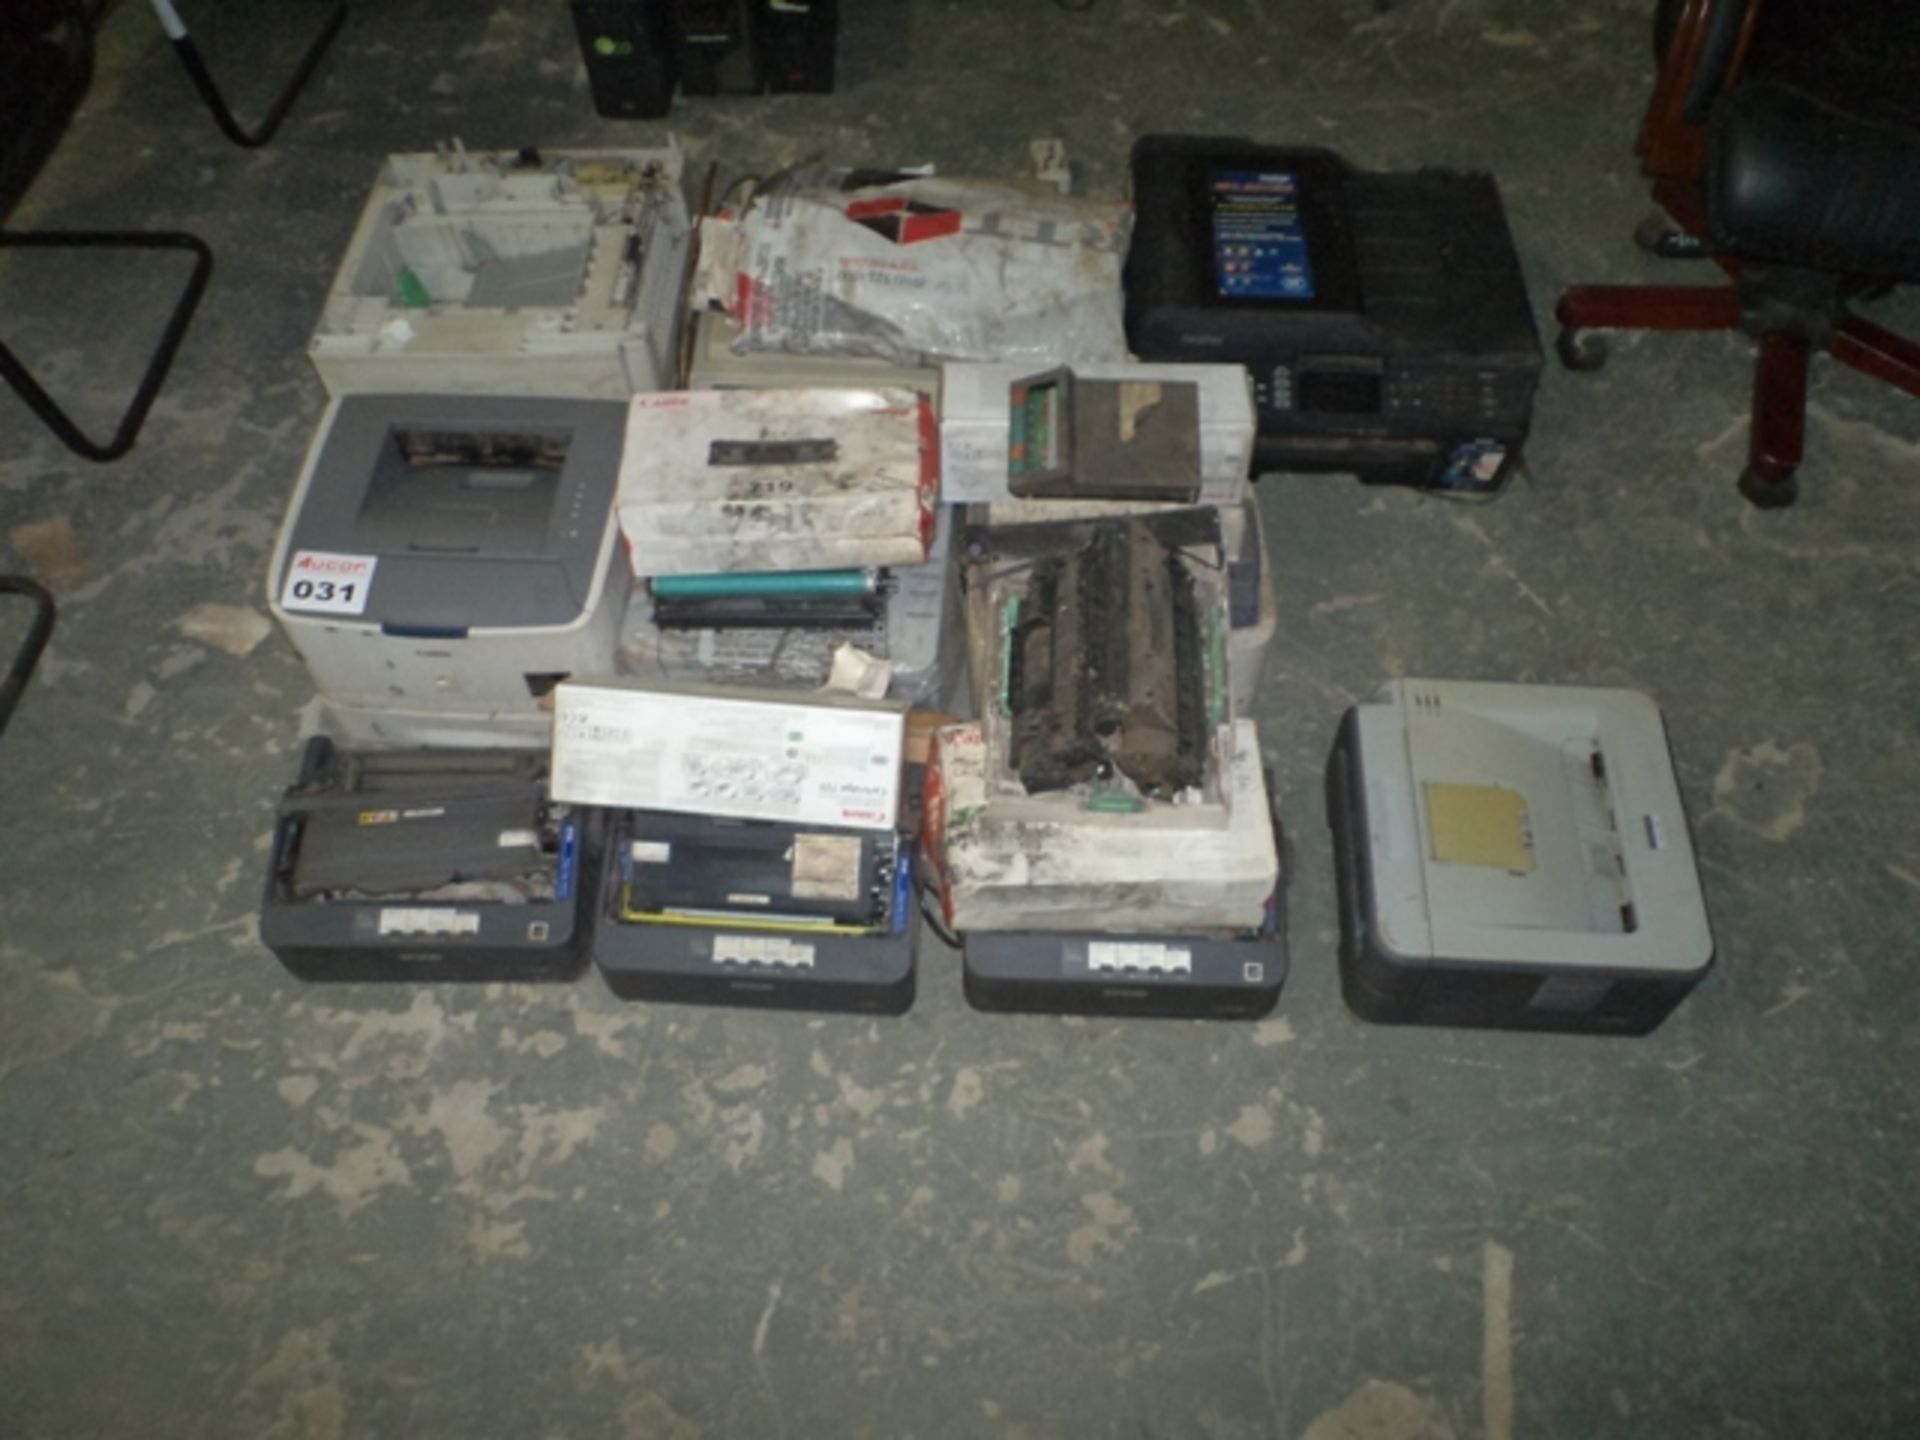 LOT ASSORTED PRINTERS INCLUDING CANON, EPSON AND BROTHER   (1 KRUGER AVE, ESTOIRE, BLOEMFONTEIN) - Image 2 of 2